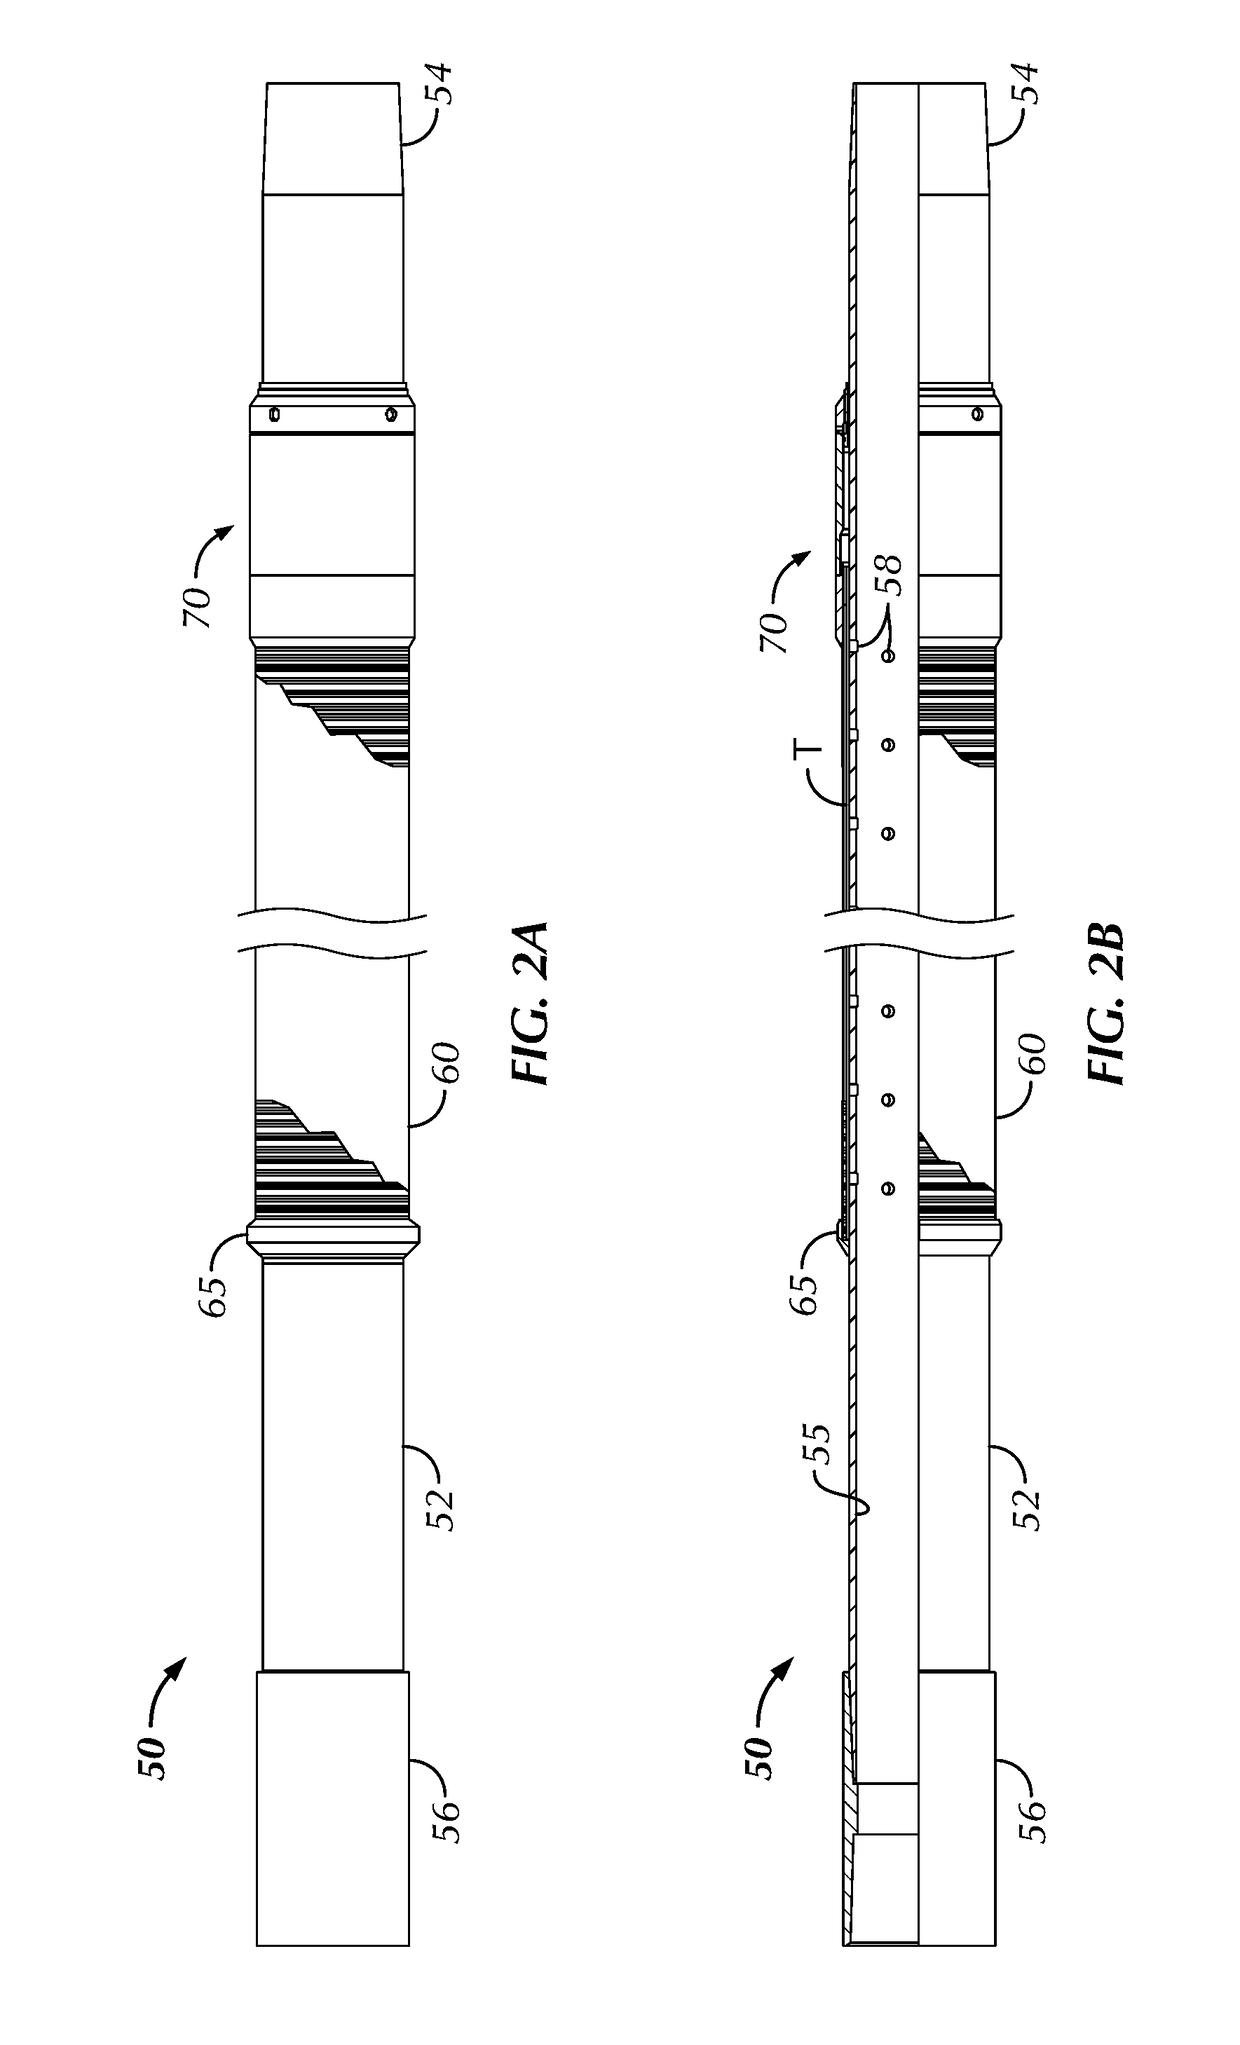 Apparatus for carrying chemical tracers on downhole tubulars, wellscreens, and the like